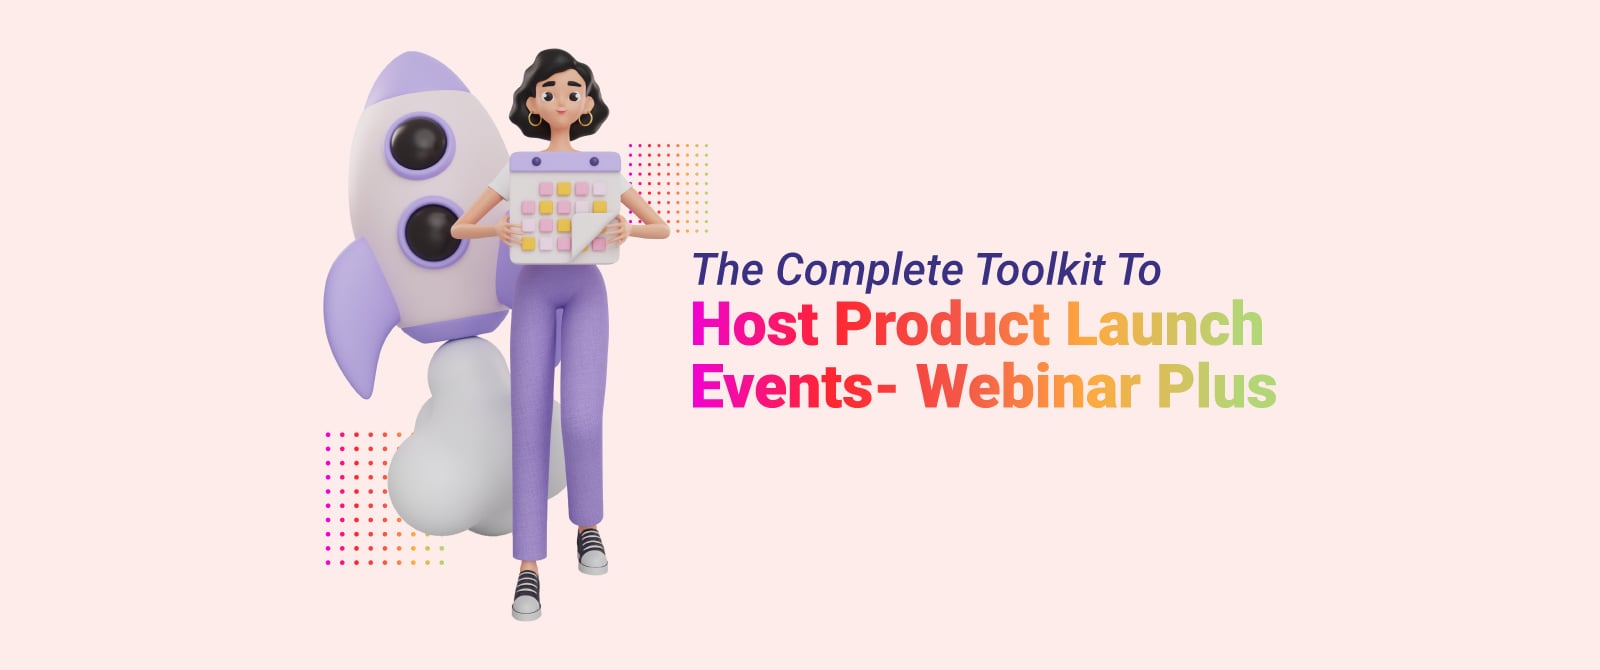 The Complete Toolkit To Host Product Launch Events – Webinar Plus